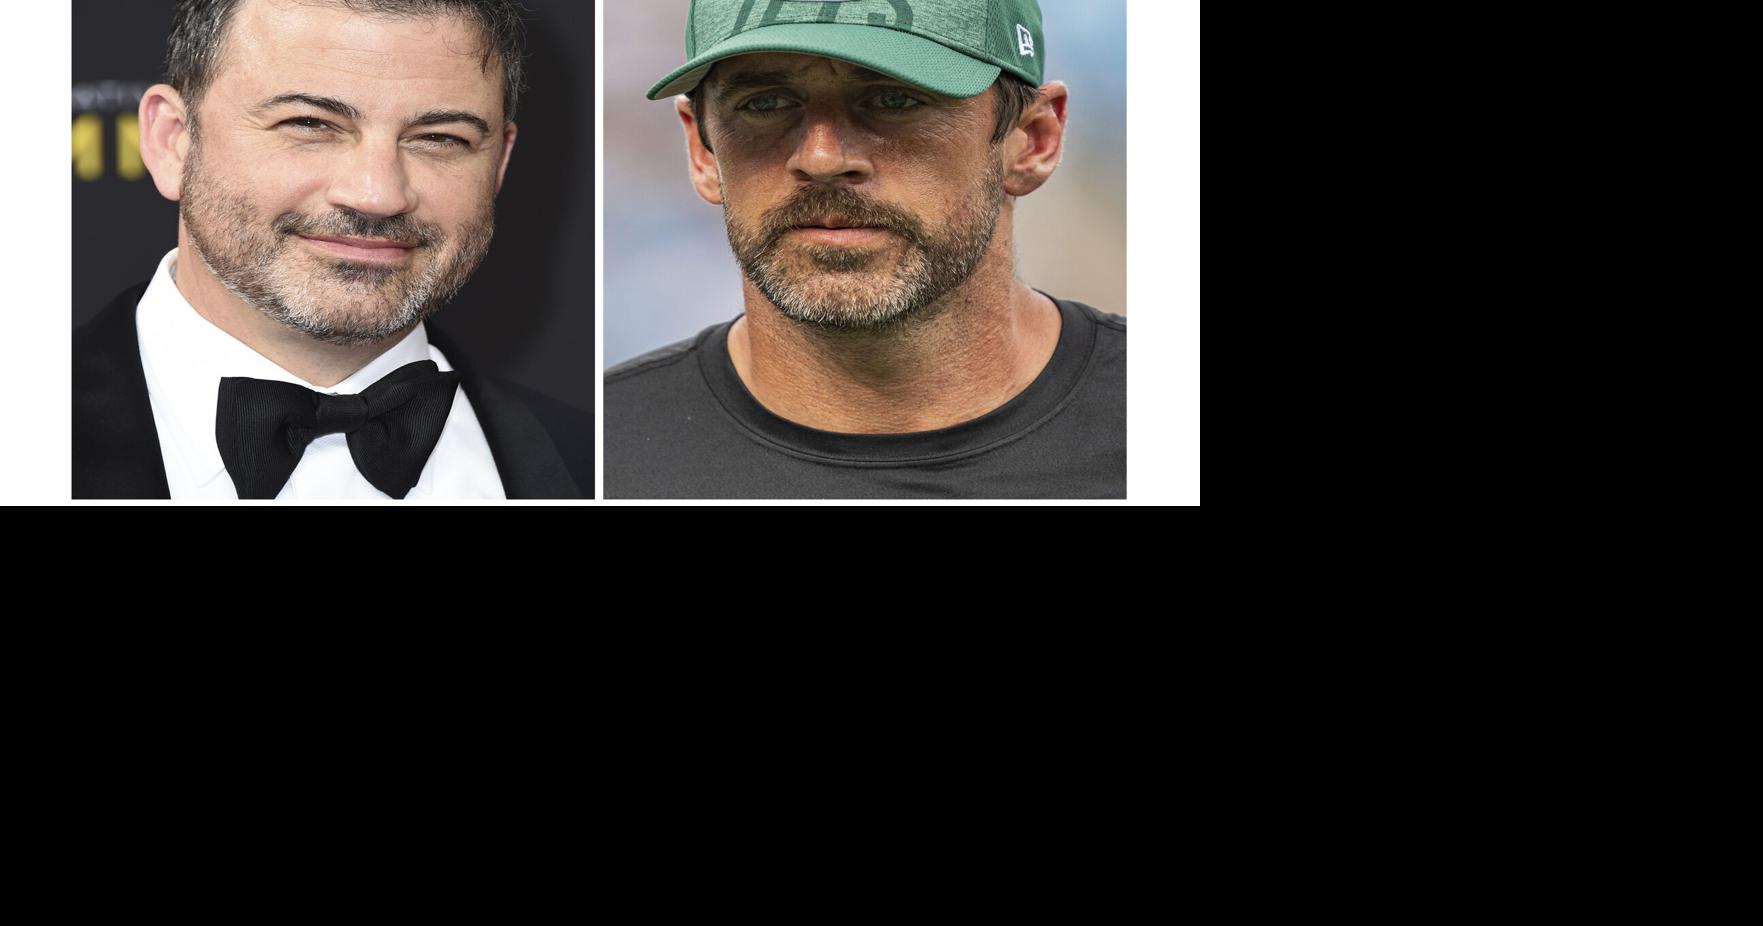 Rodgers denies implying Kimmel was tied to Epstein, condemns those who do